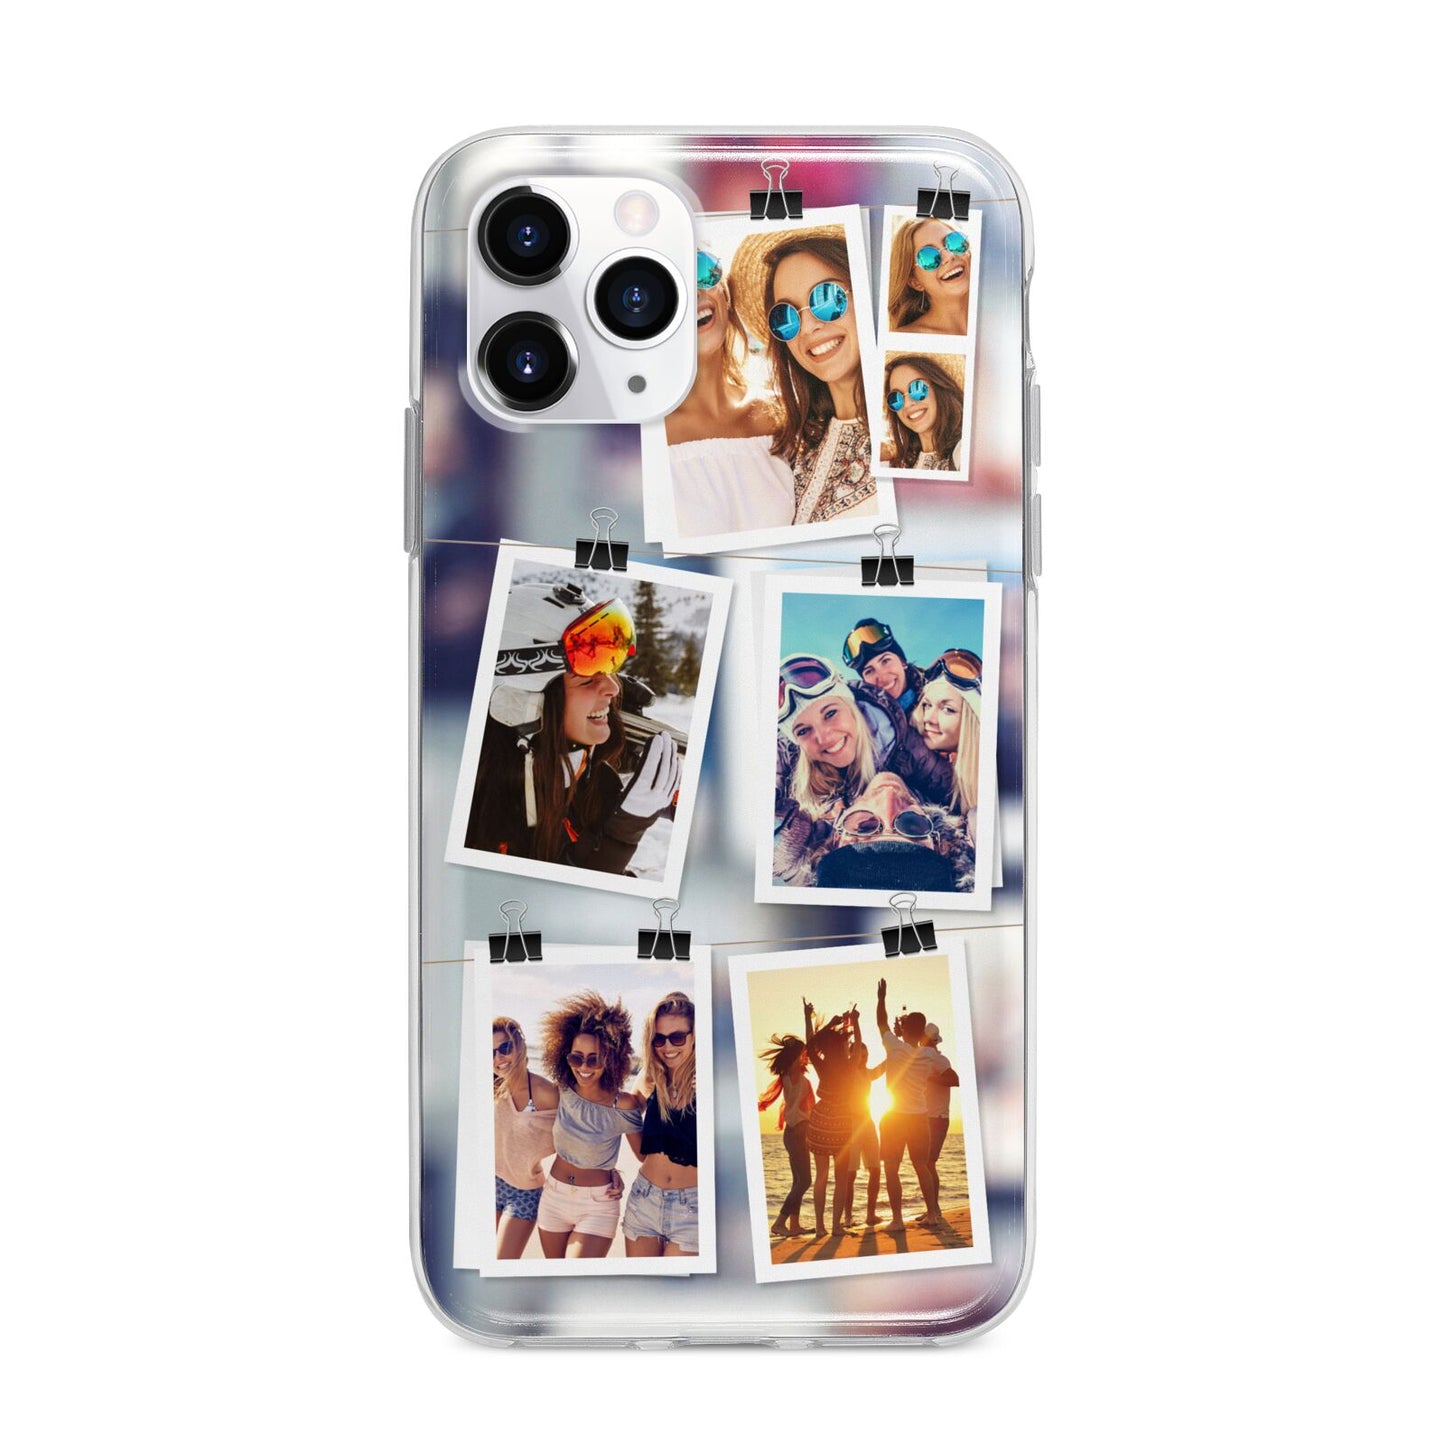 Photo Wall Montage Upload Apple iPhone 11 Pro in Silver with Bumper Case